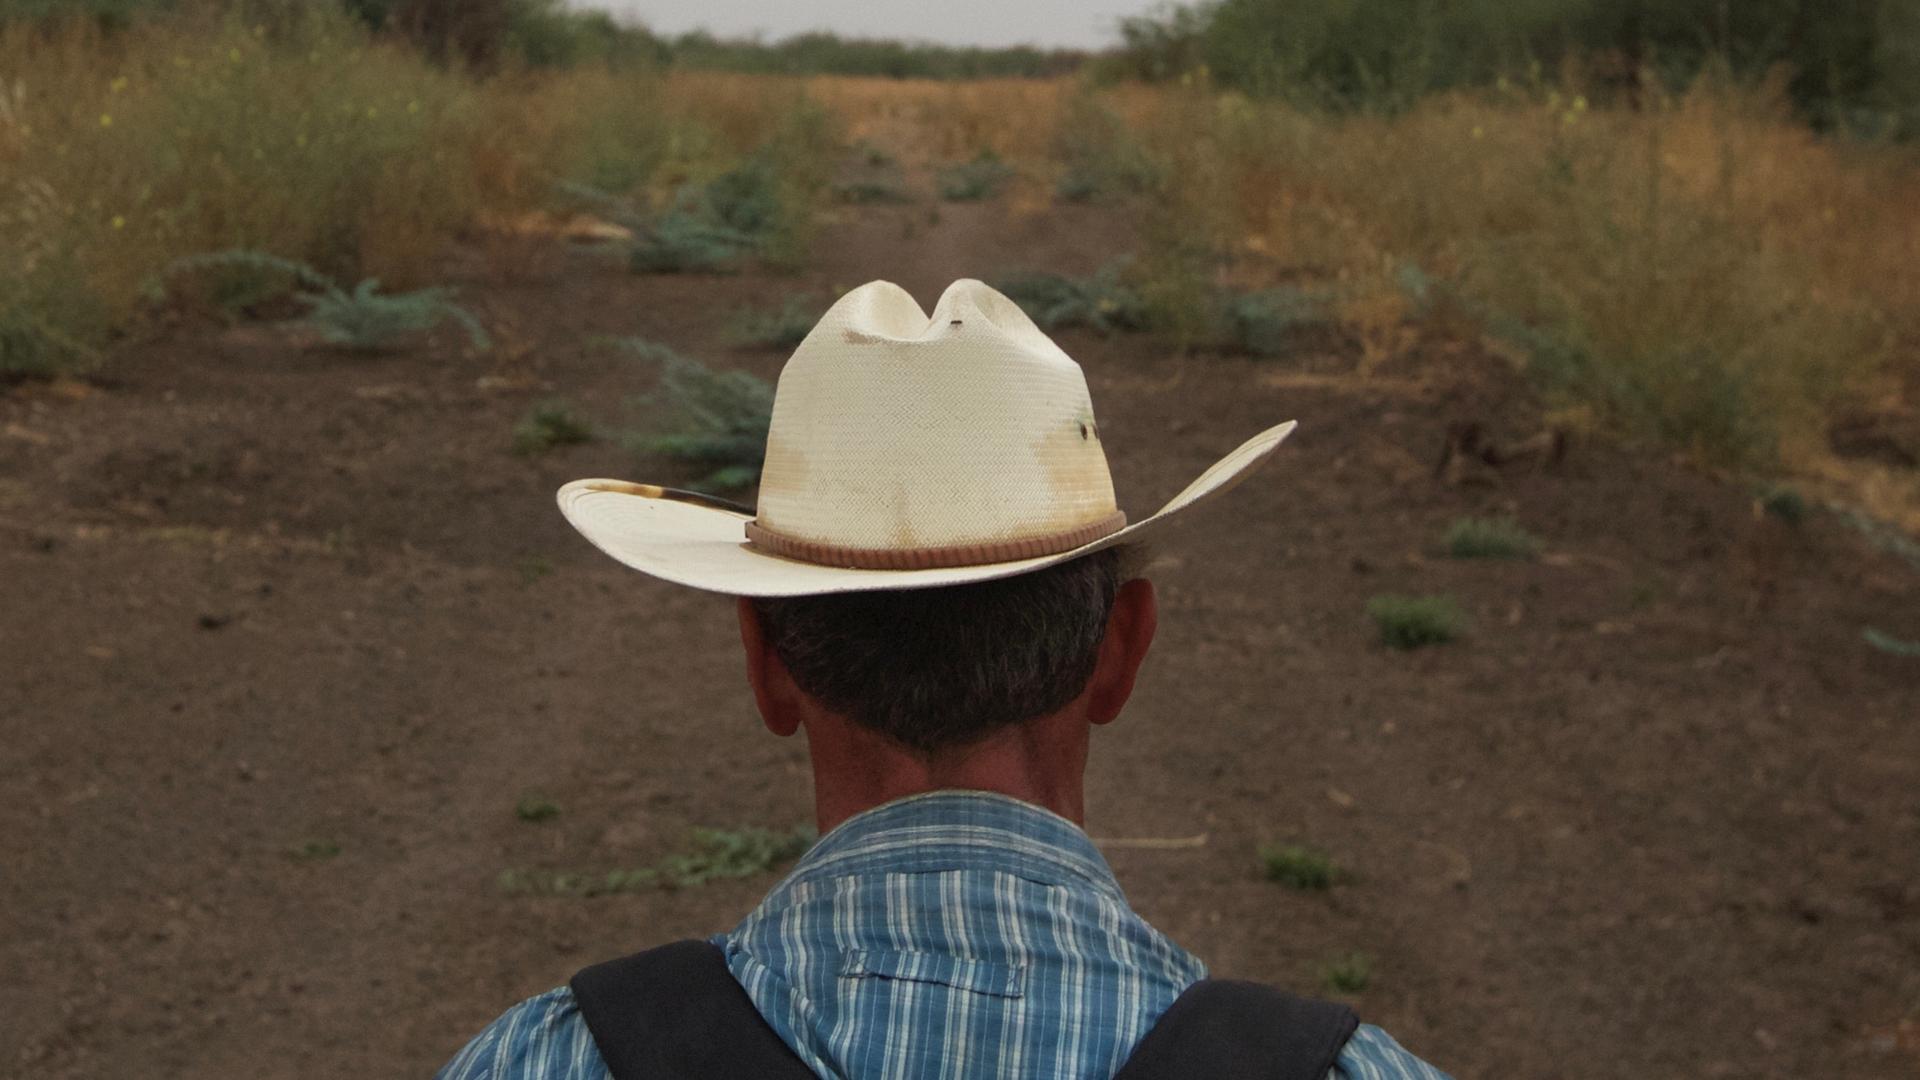 A back shot of a man wearing a bookbag and hat looking into a grass pathway